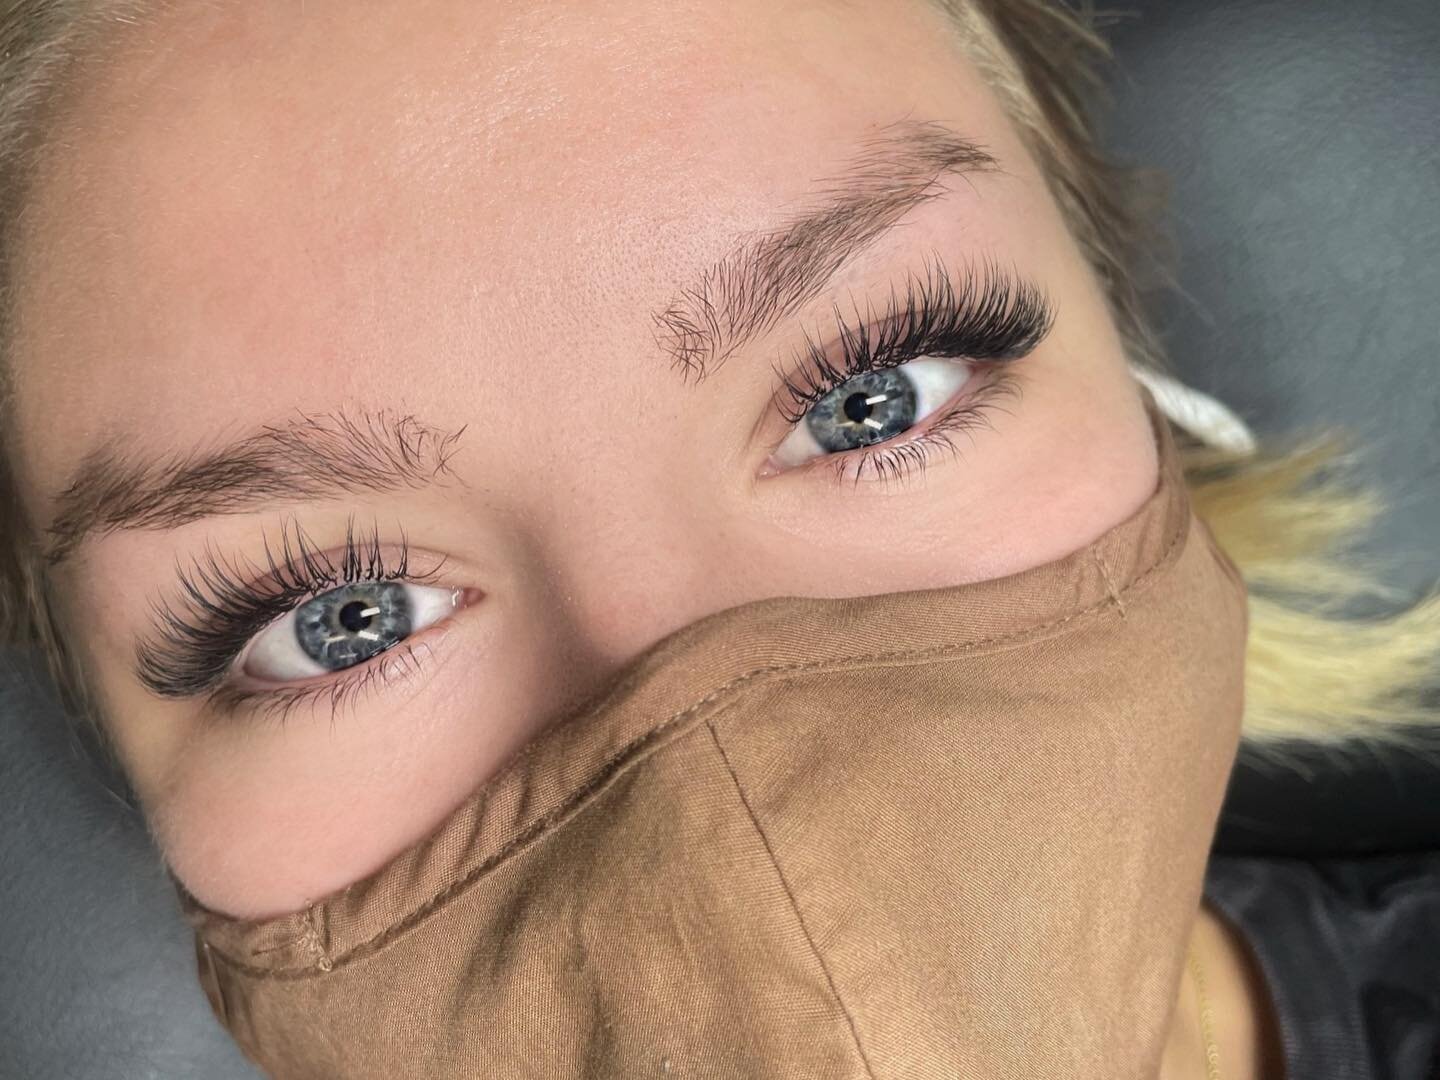 Cleeeeean set done by our newest lash artist @talaartistry 👏🏼🖤

Tala has been lashing for over 7 years and is very talented across all lash styles! Book your Christmas set with her through the link in our bio before it&rsquo;s too late 🥲

🫶🏼🫶?